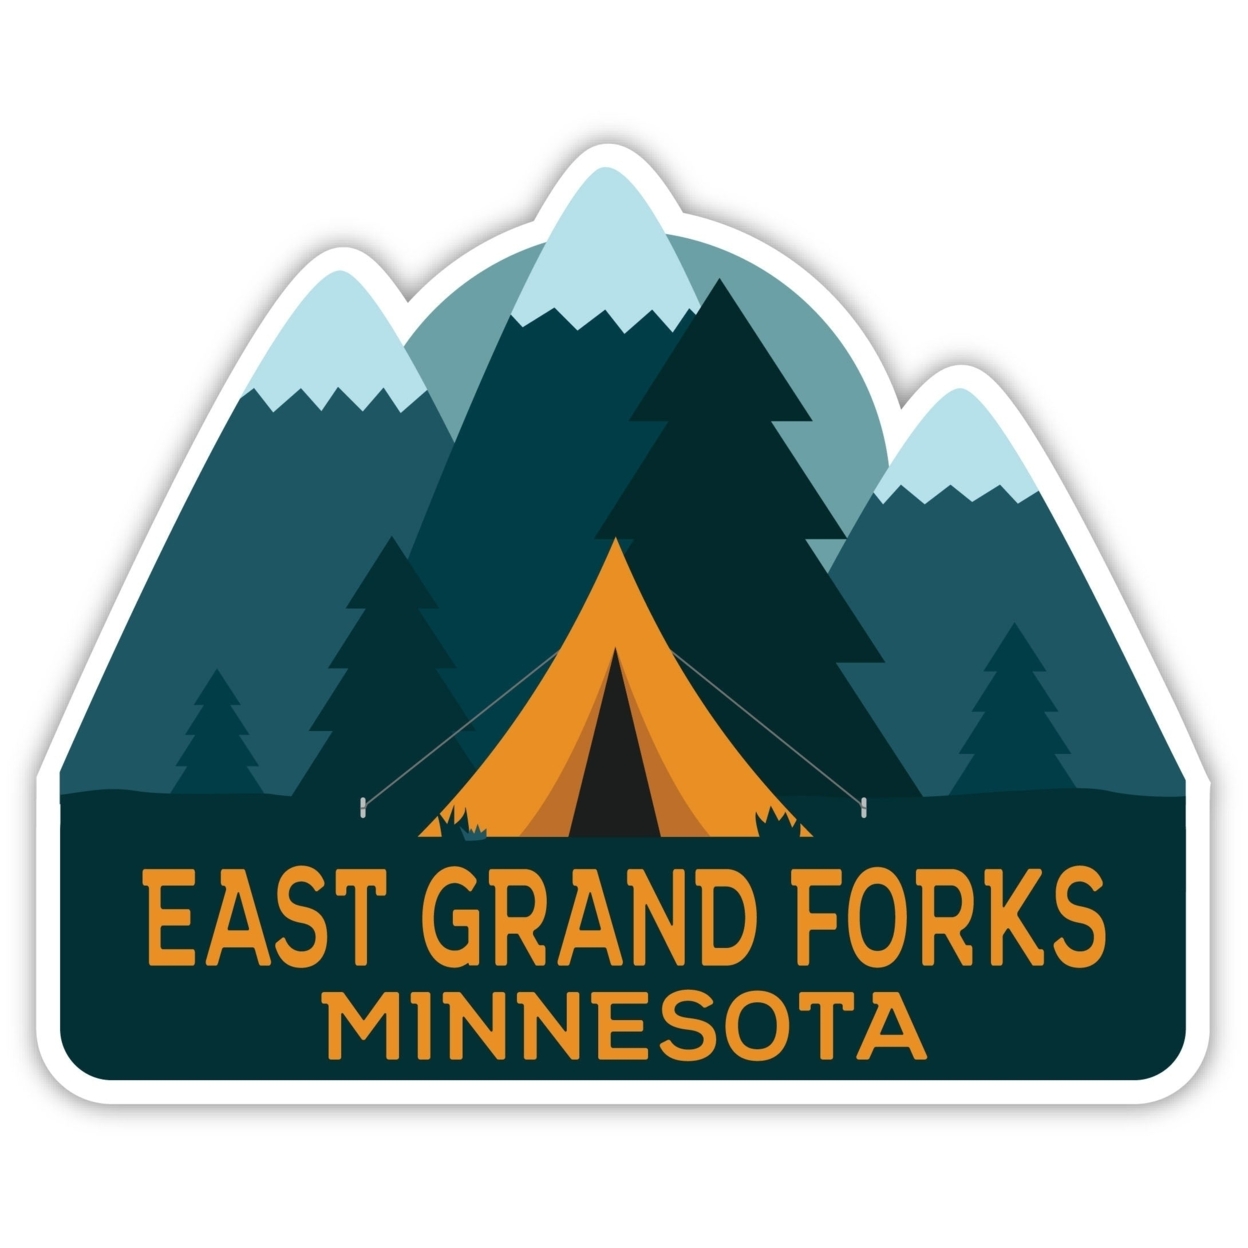 East Grand Forks Minnesota Souvenir Decorative Stickers (Choose Theme And Size) - Single Unit, 10-Inch, Tent